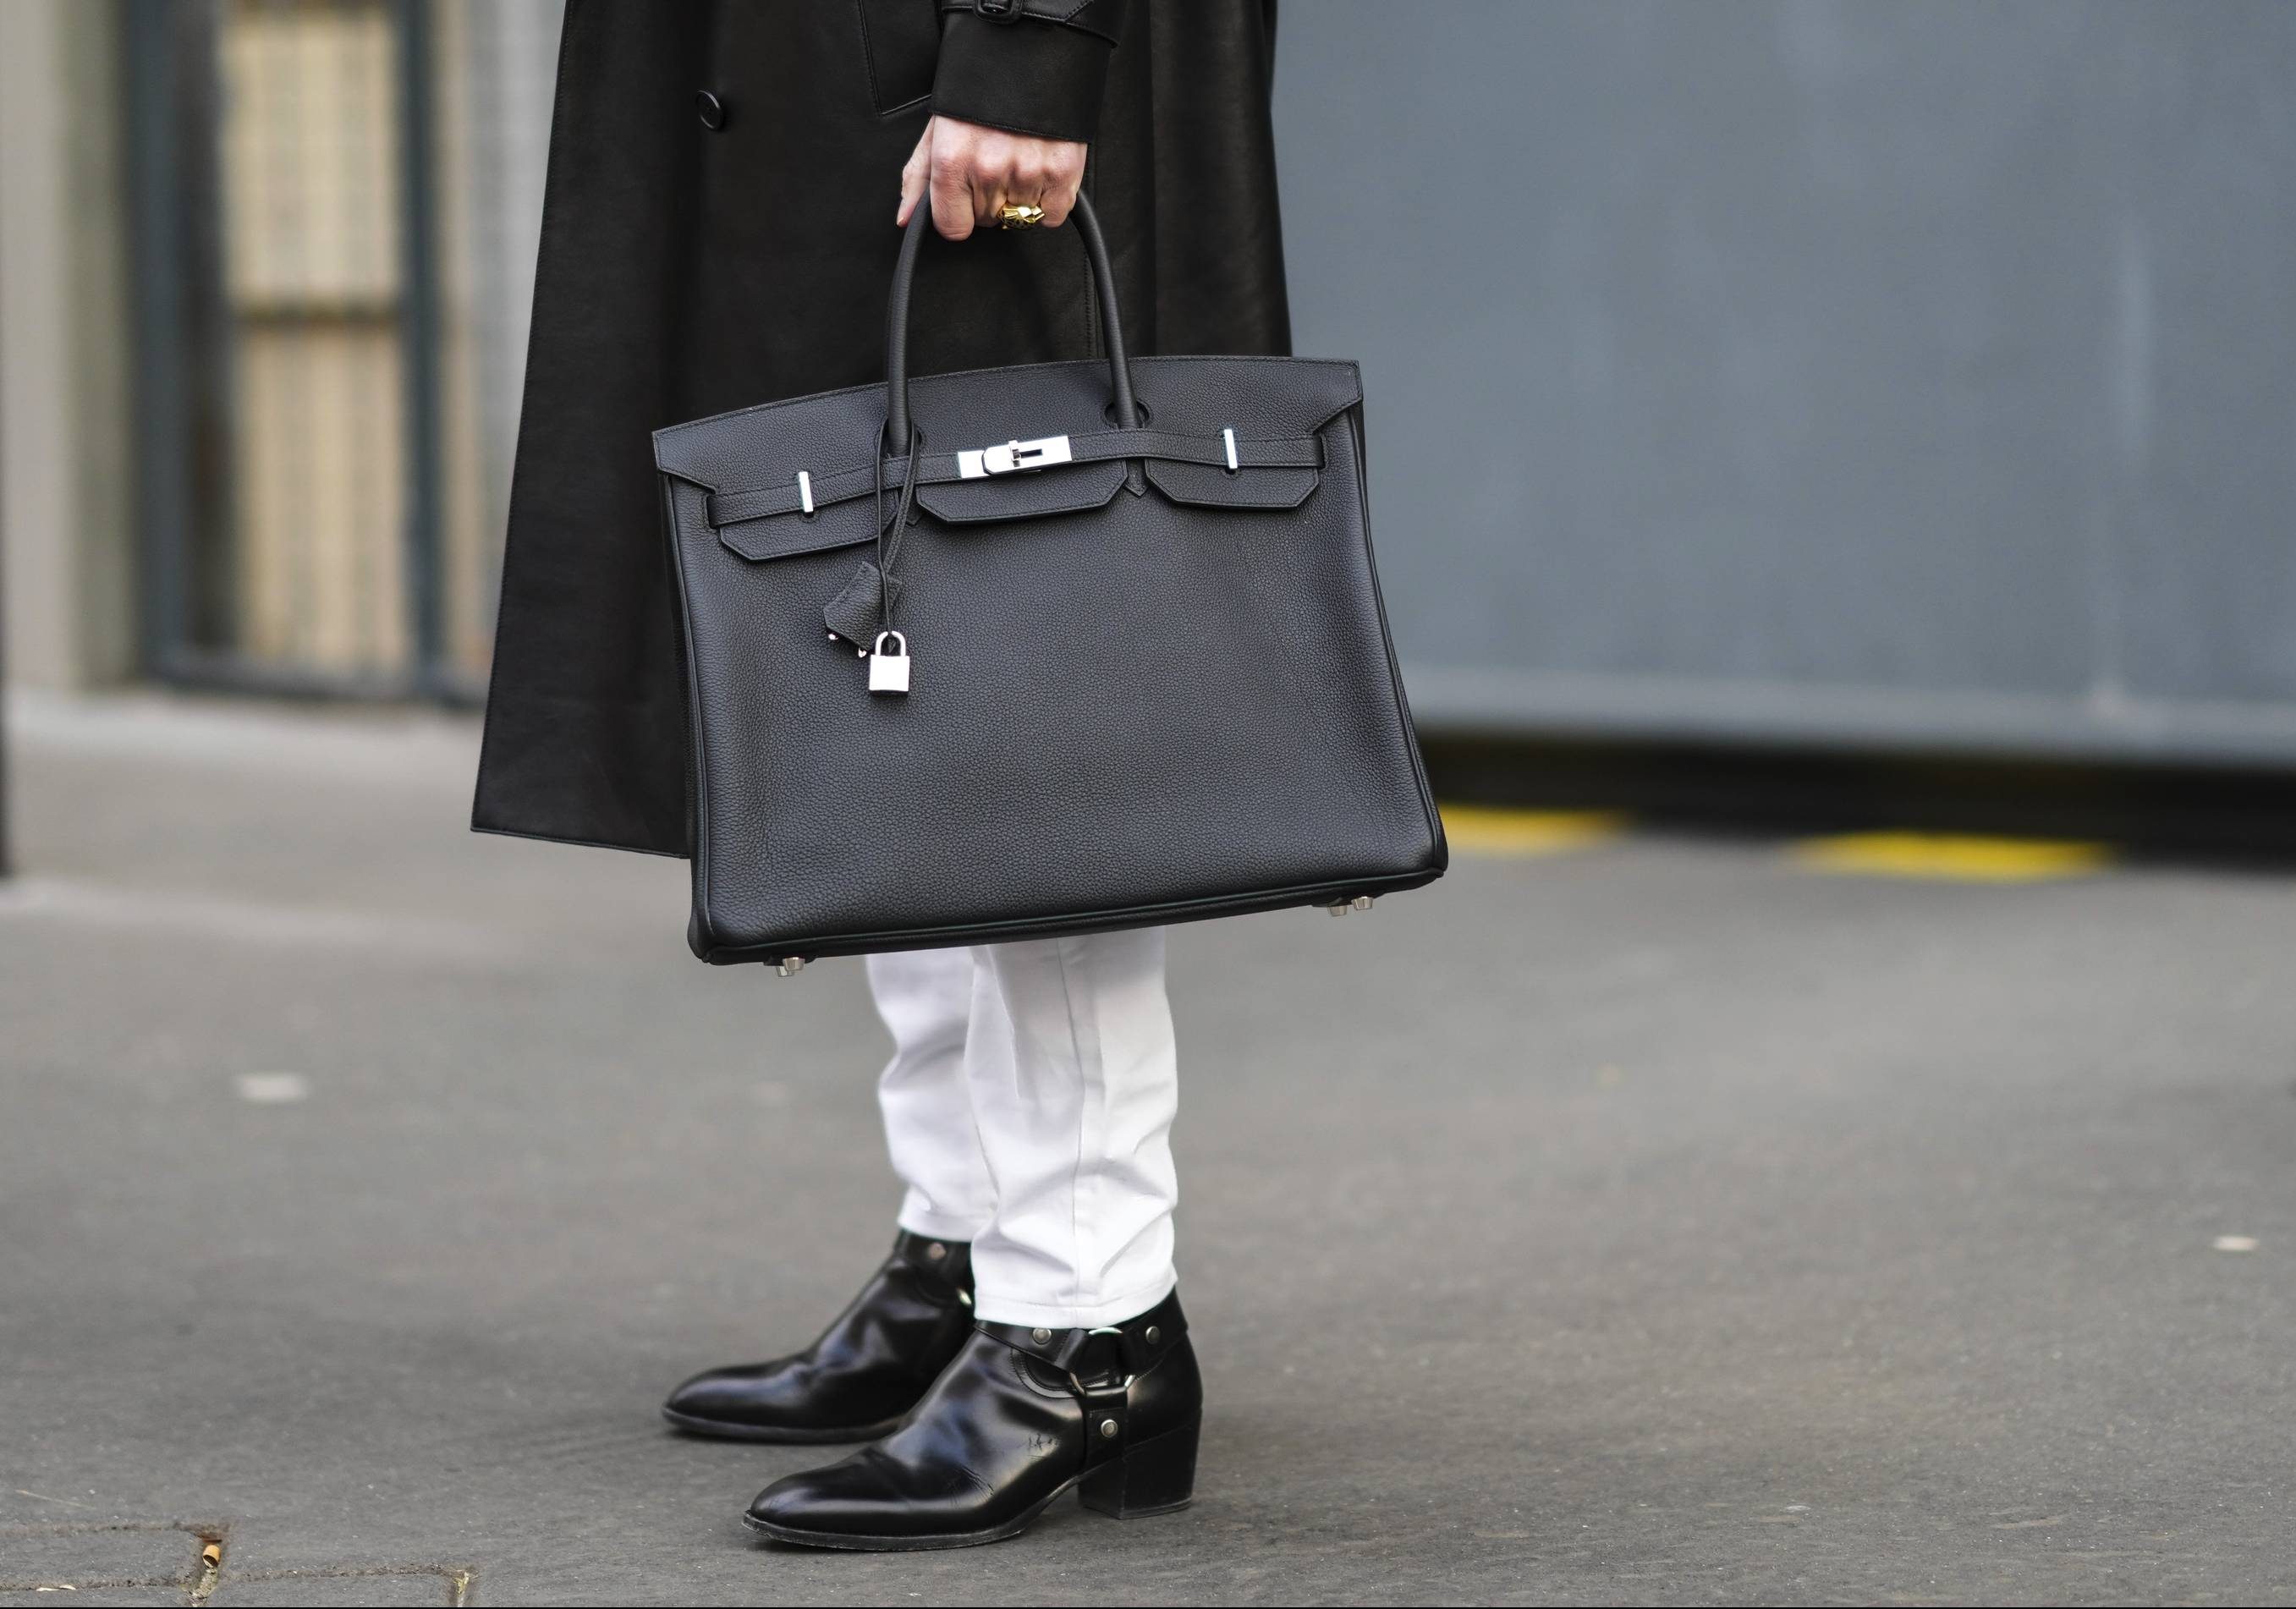 Men’s Handbags Are A Thing Now: Here’s Why